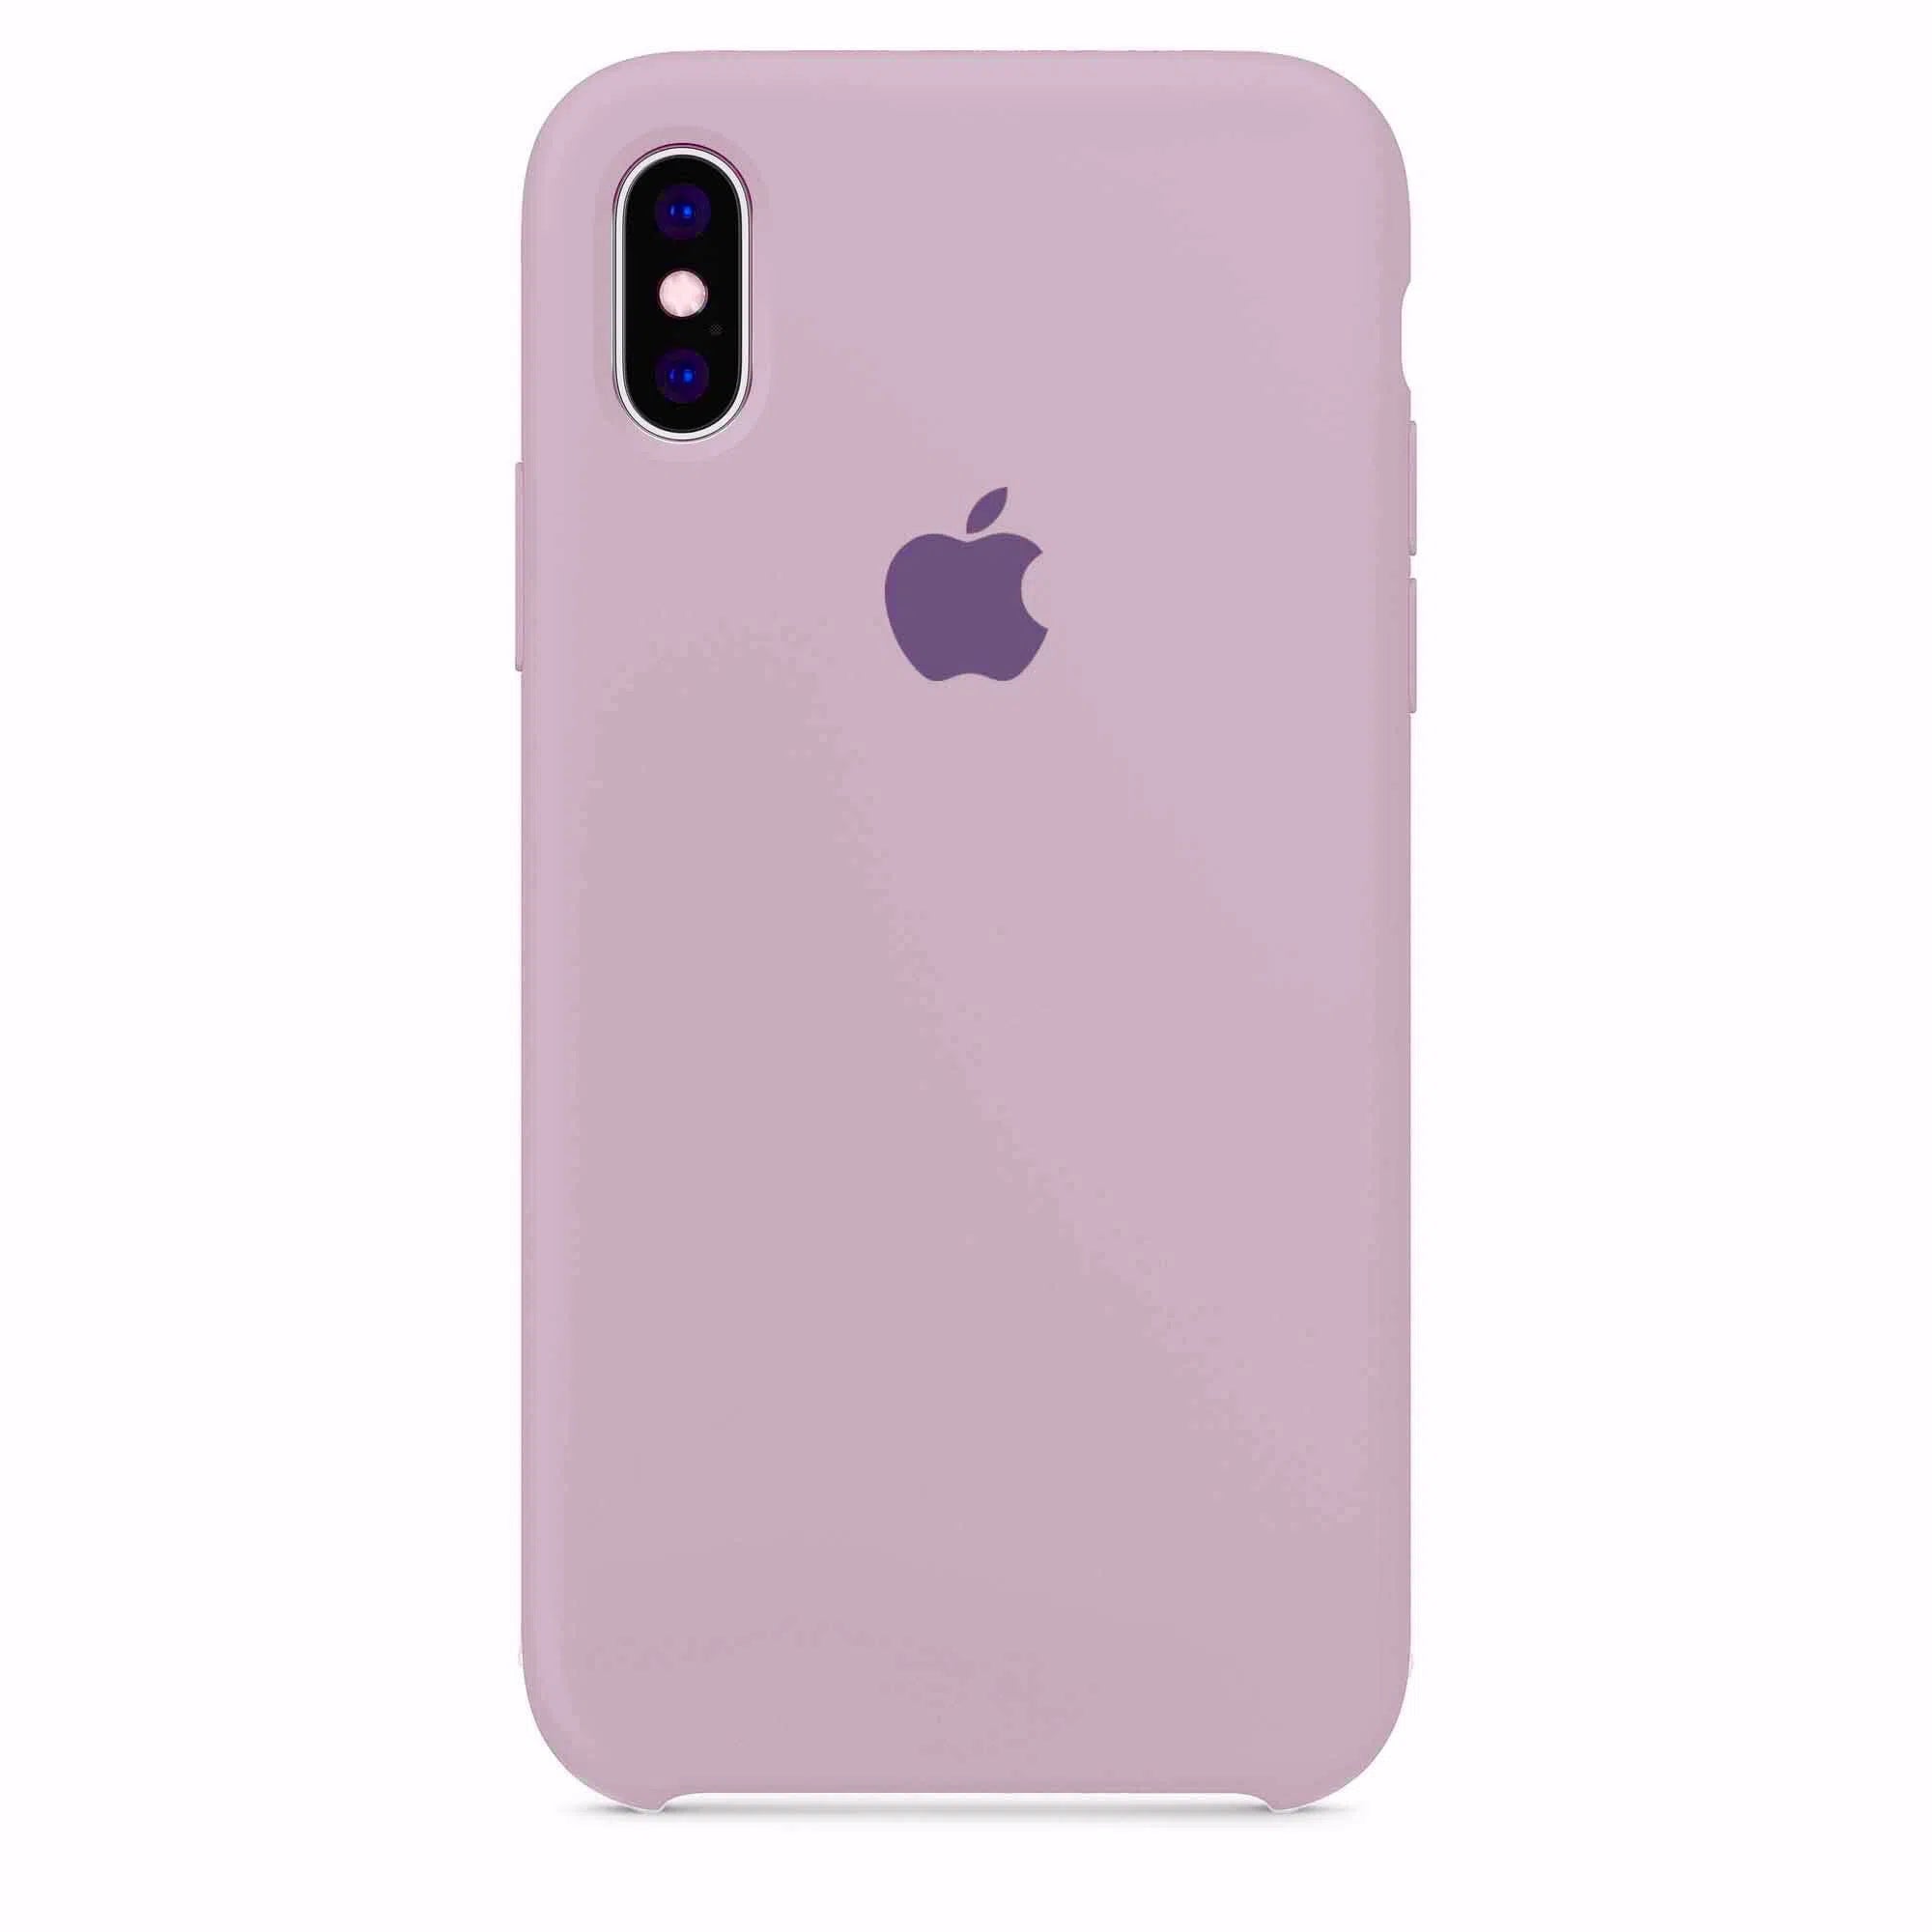 Husa iPhone Silicone Case Lavender (Mov Pal) Anca's Store X/Xs 